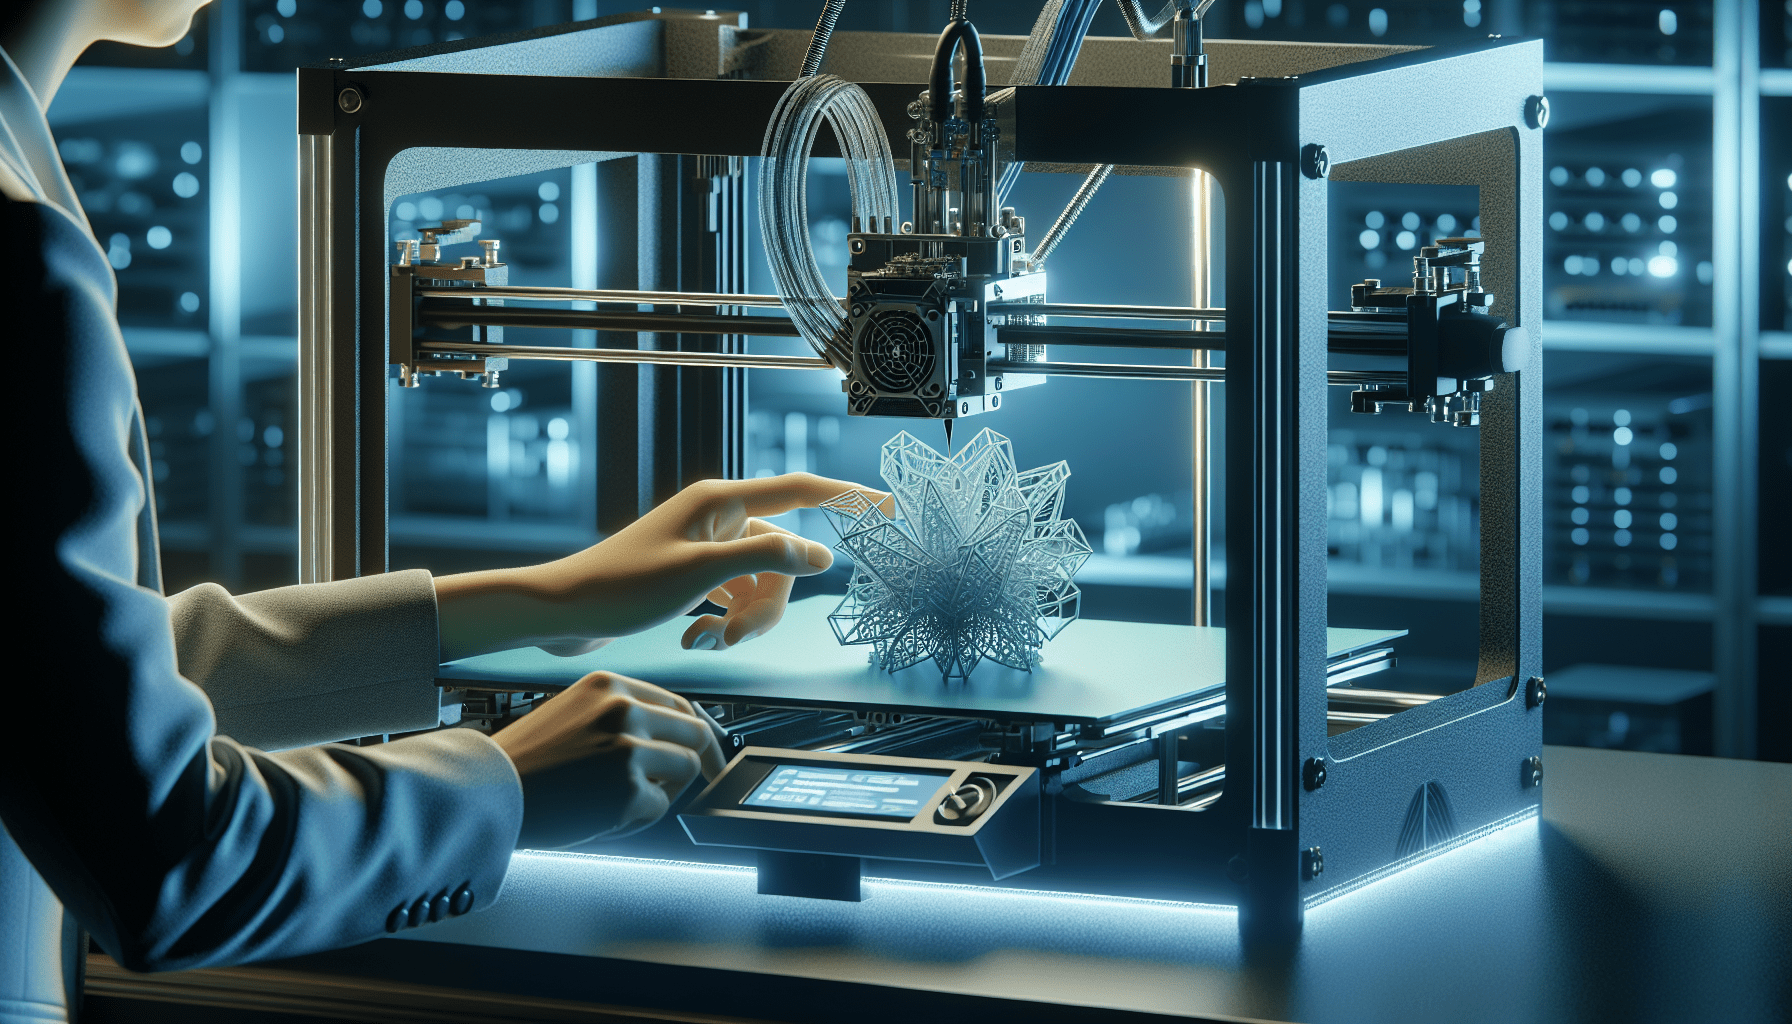 ai-build-launches-updated-3d-printing-software-in-london Ai Build Launches Updated 3D Printing Software in London